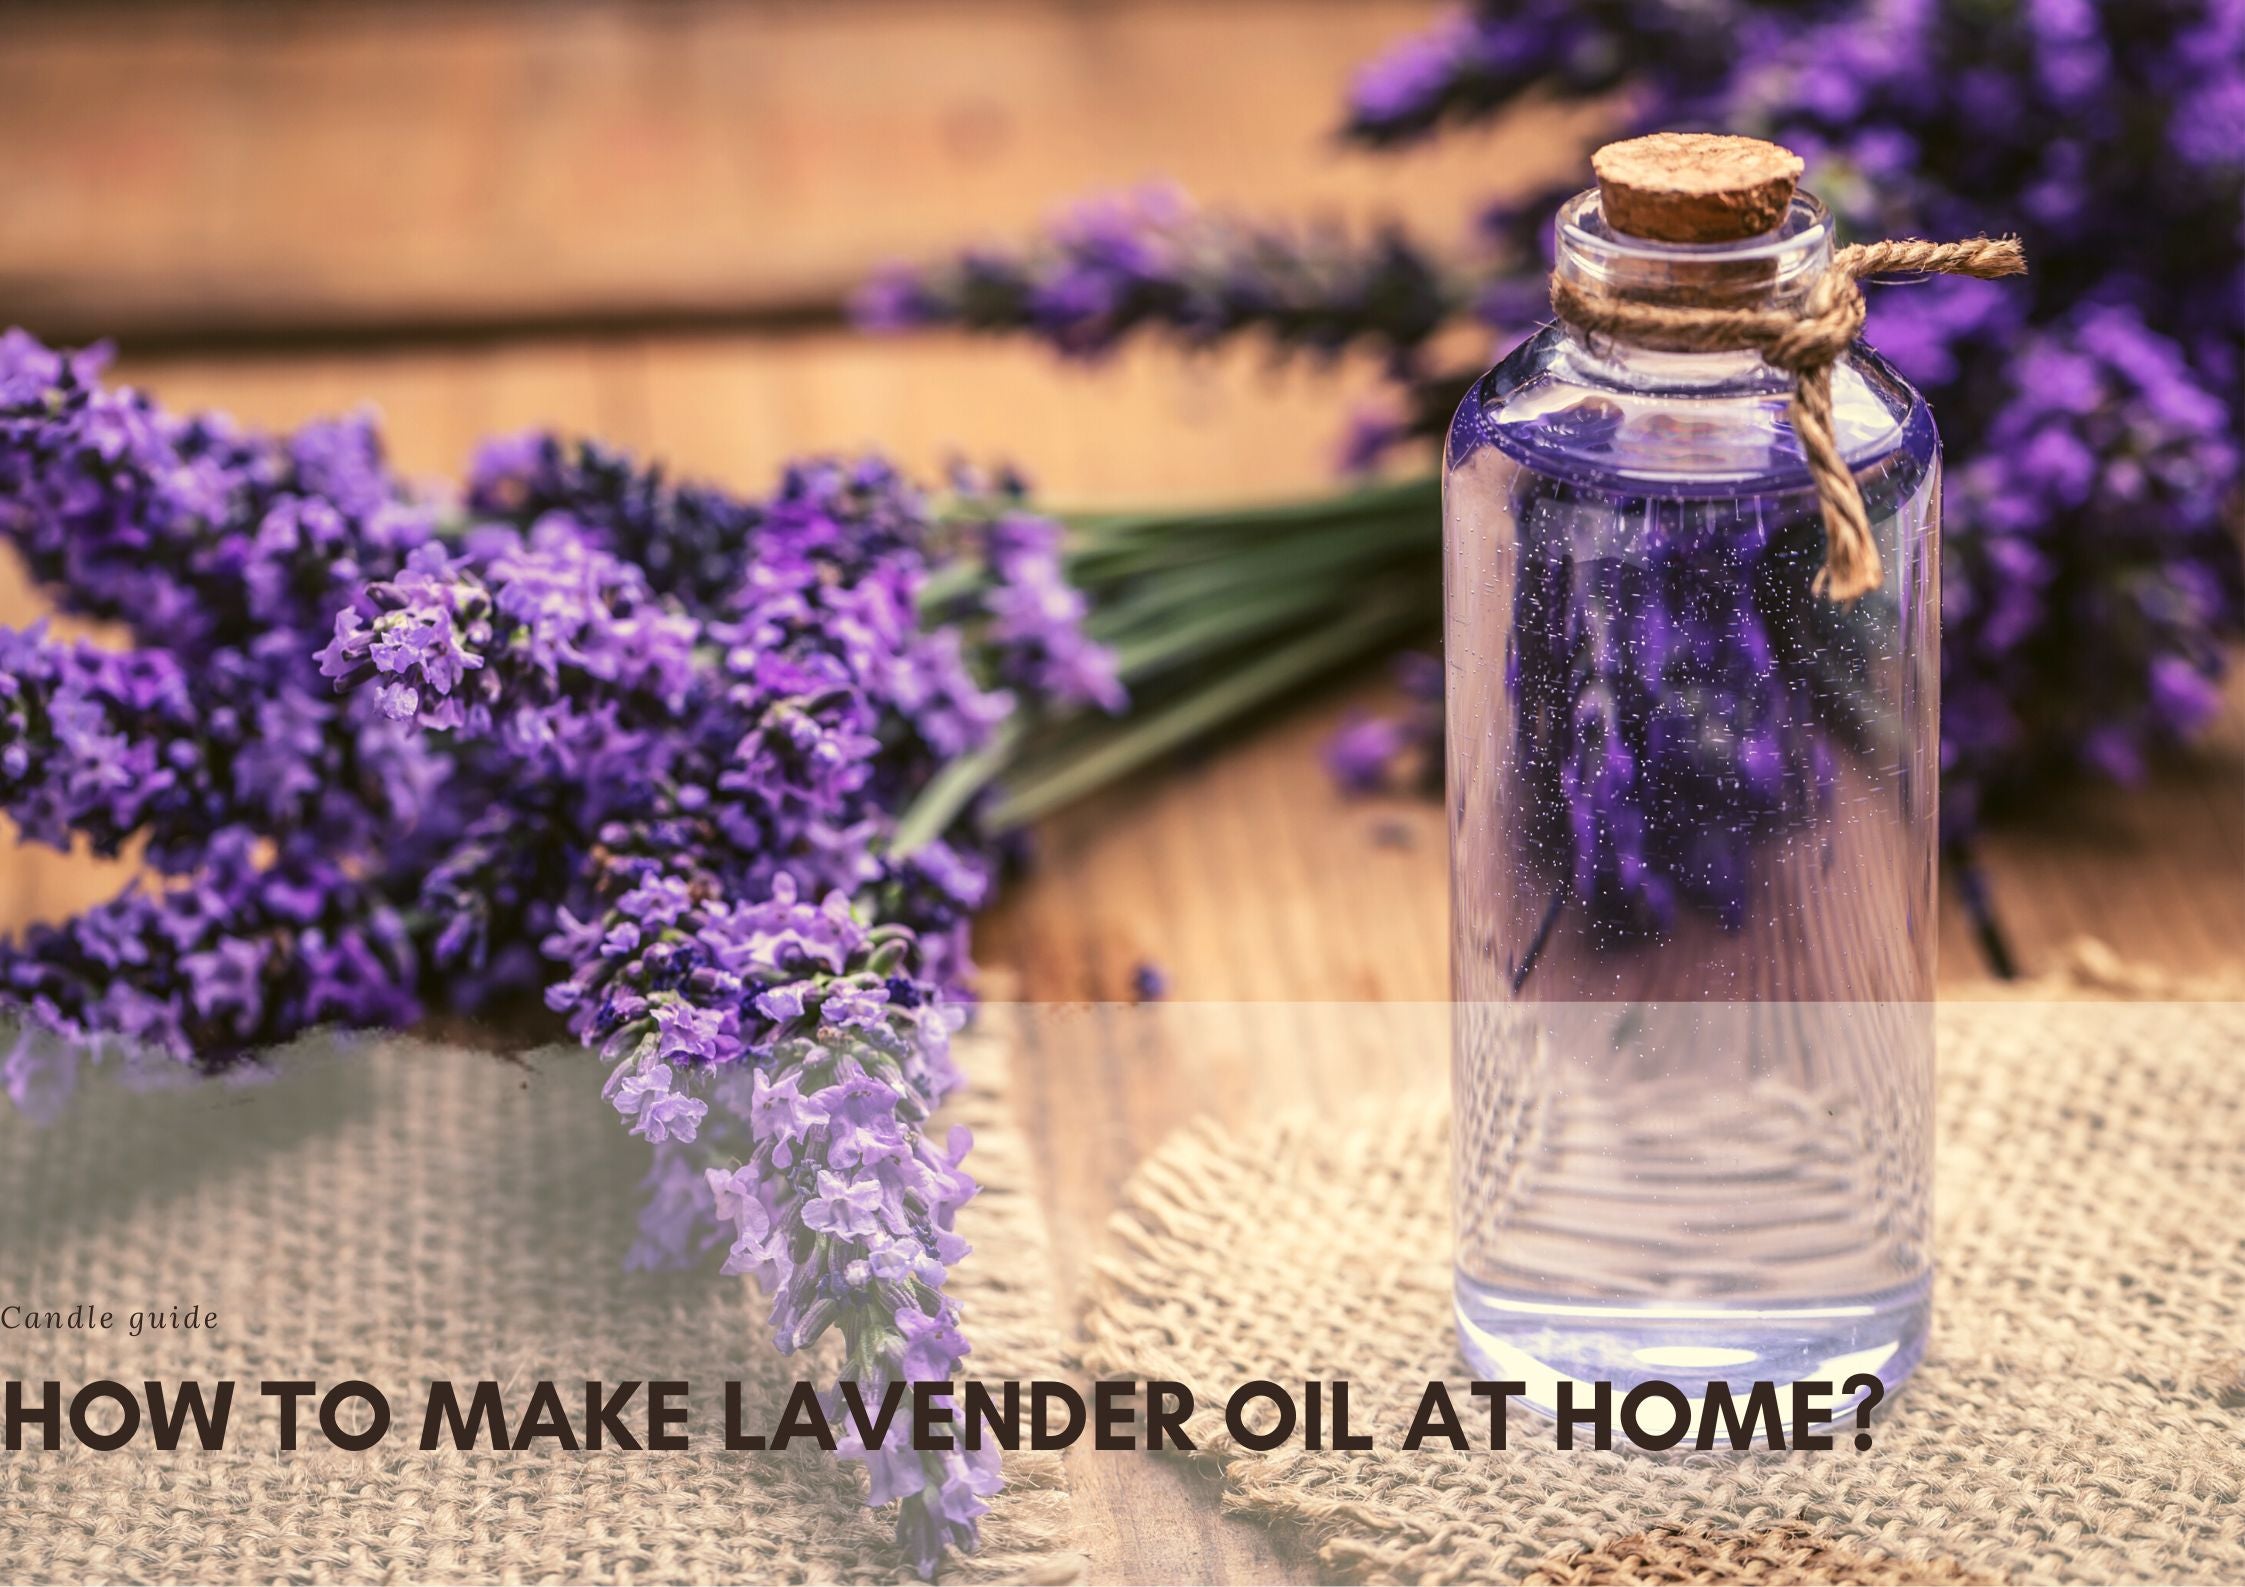 How to make lavender oil at home?